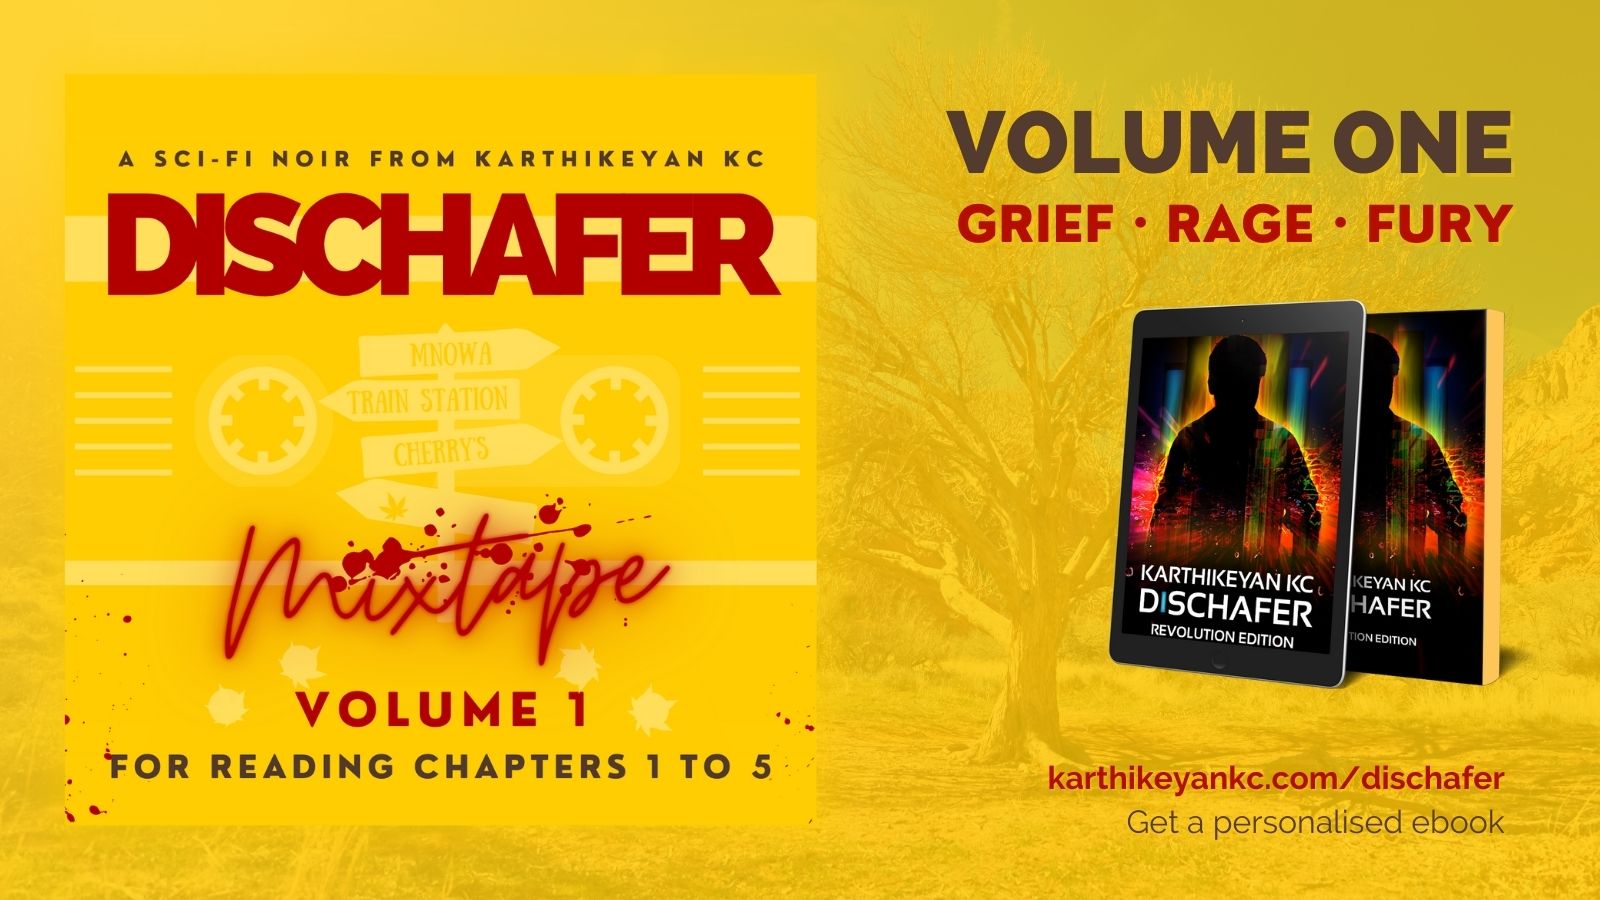 Music compilation for Dischafer - For Chapters 1 to 5.